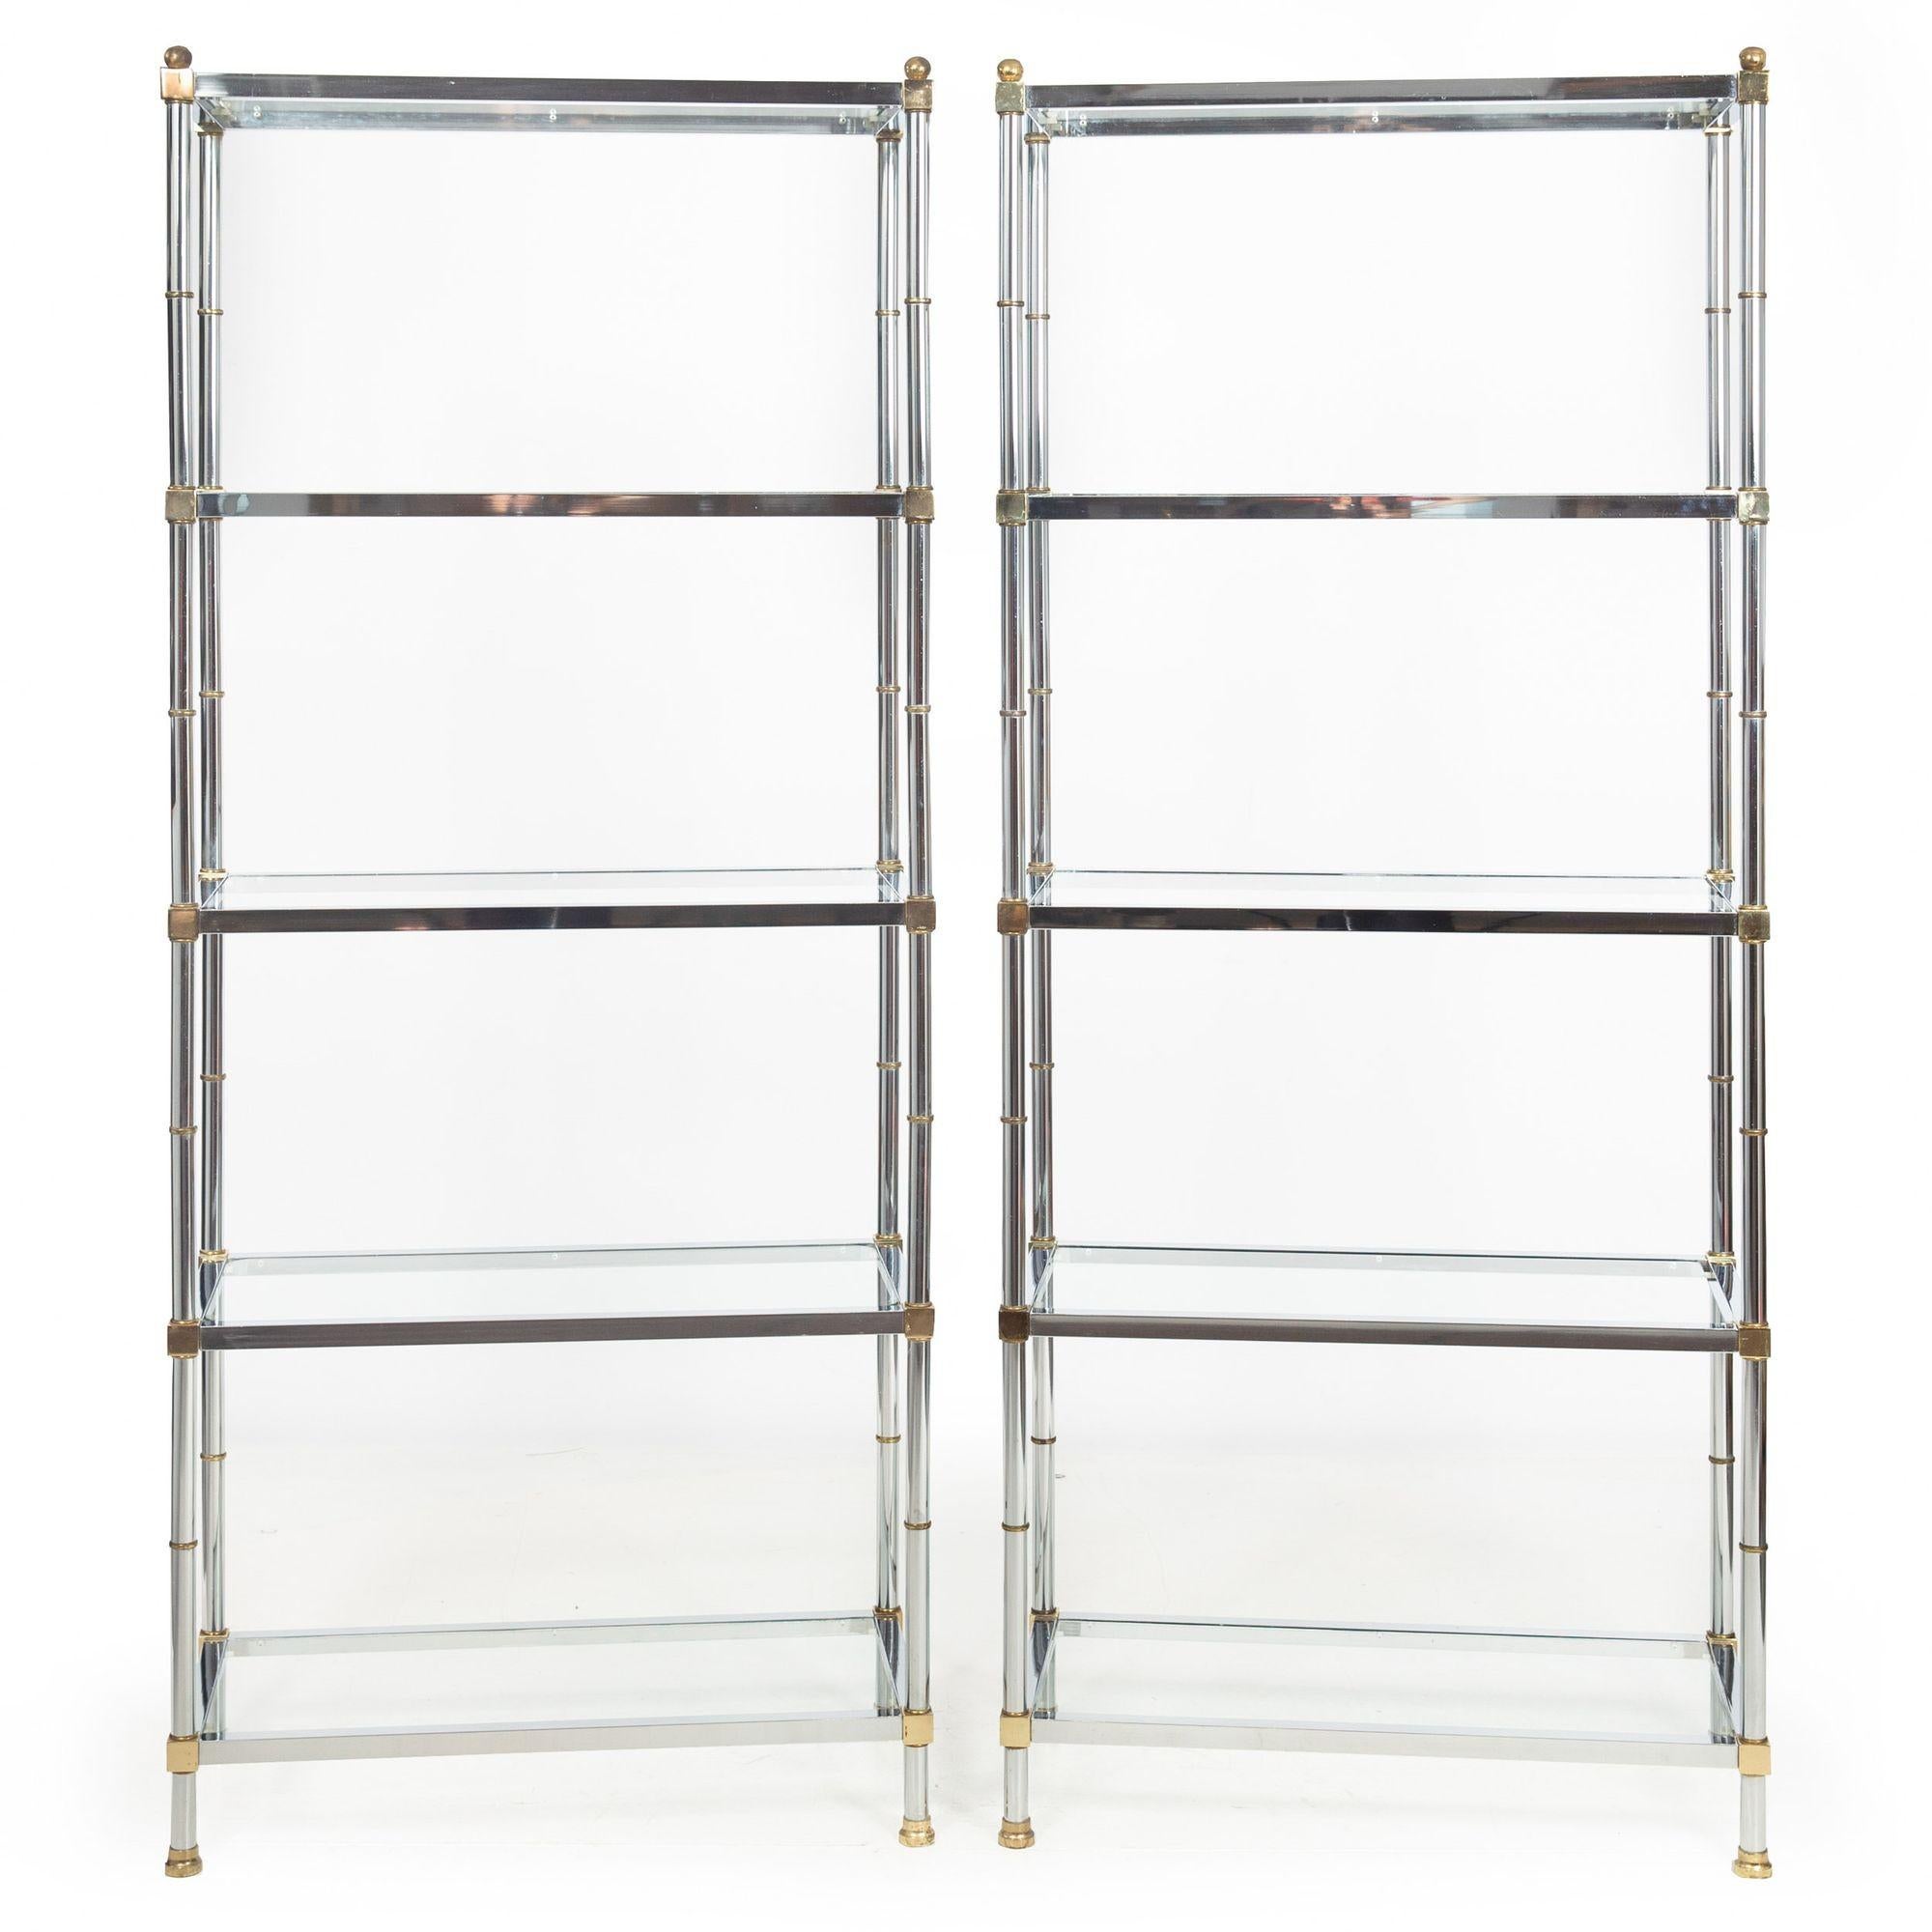 PAIR OF MID-CENTURY CHROME, BRASS AND GLASS ETAGERE BOOKSHELVES
In the manner of Maison Jansen, circa mid 20th century
Item # 904SAN13A

A nice modernist pair of chromed steel and brass open bookshelves with five-shelves on each, it features brass